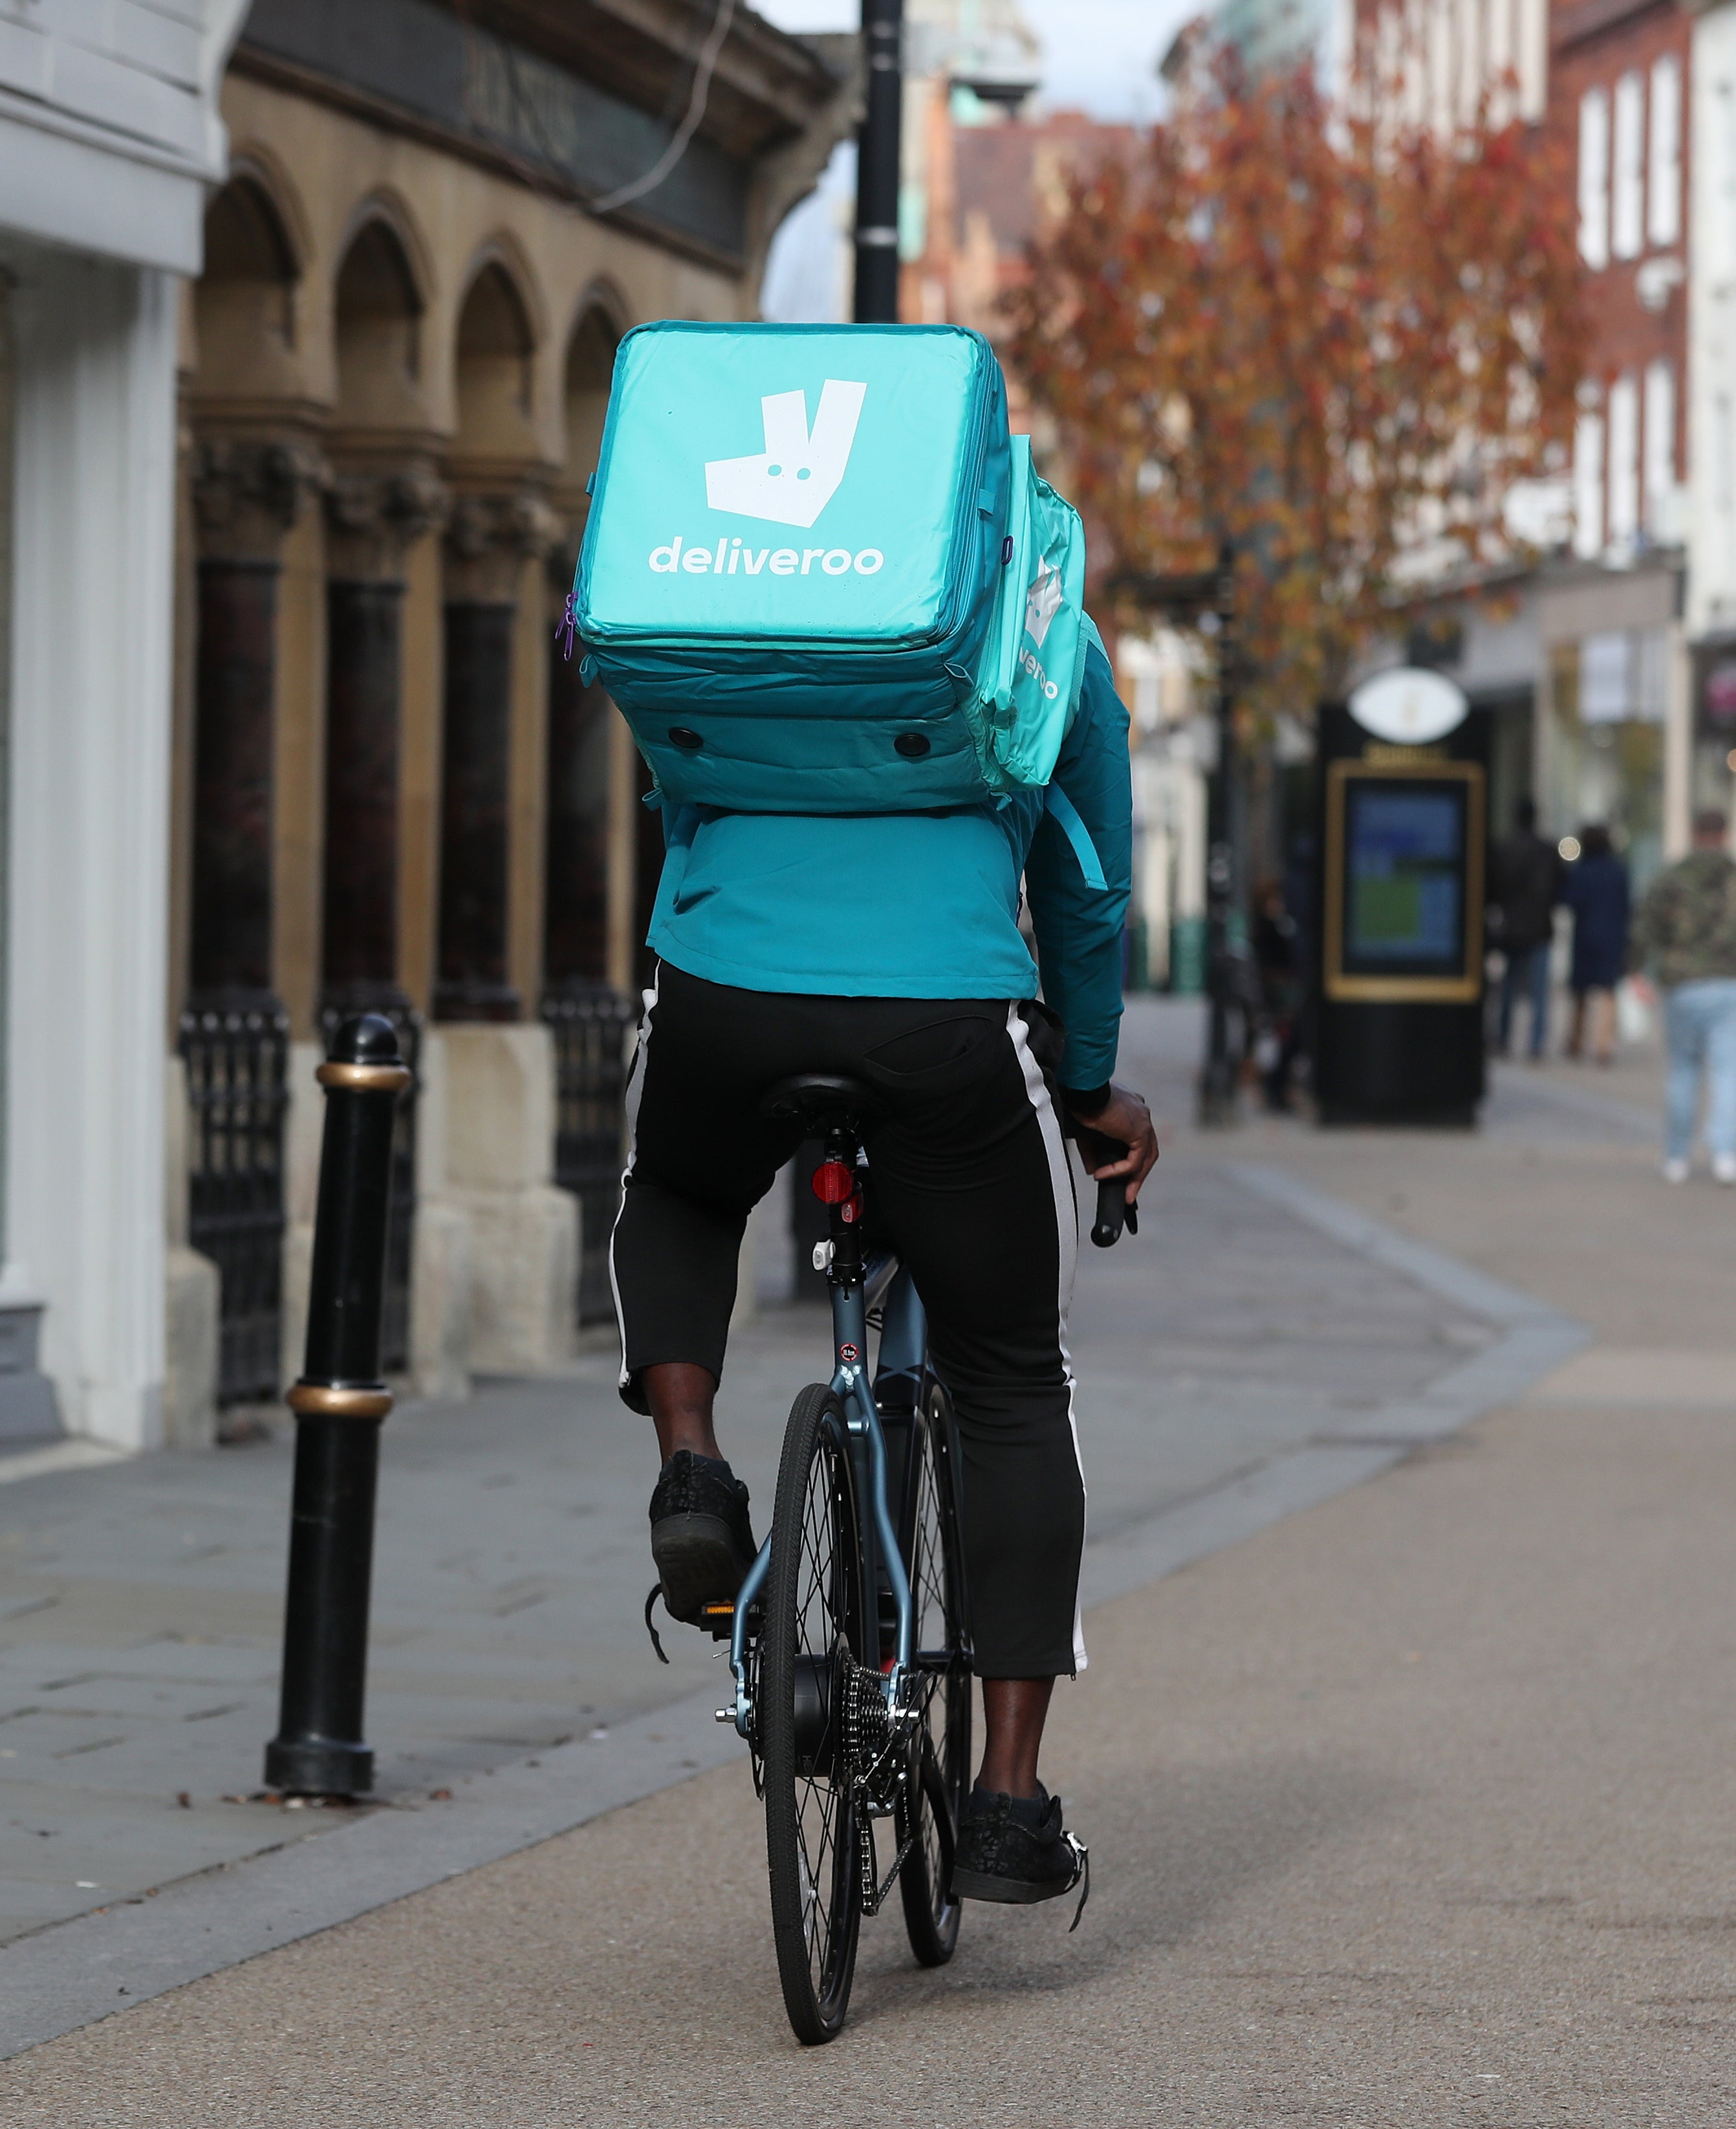 Deliveroo has posted widened pre-tax losses after seeing cash-strapped consumers cut back on takeaways (PA)